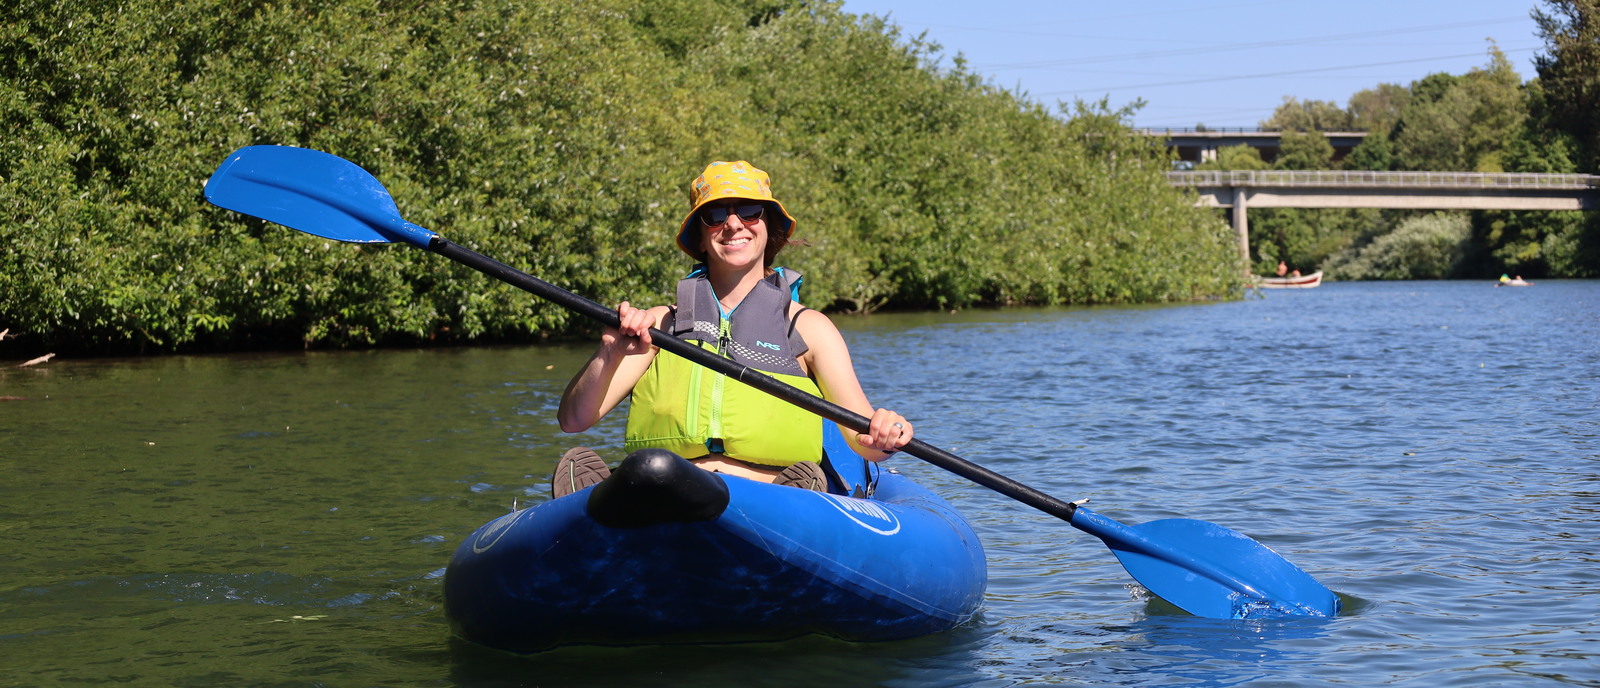 A person paddles an inflatable kayak on a sunny day